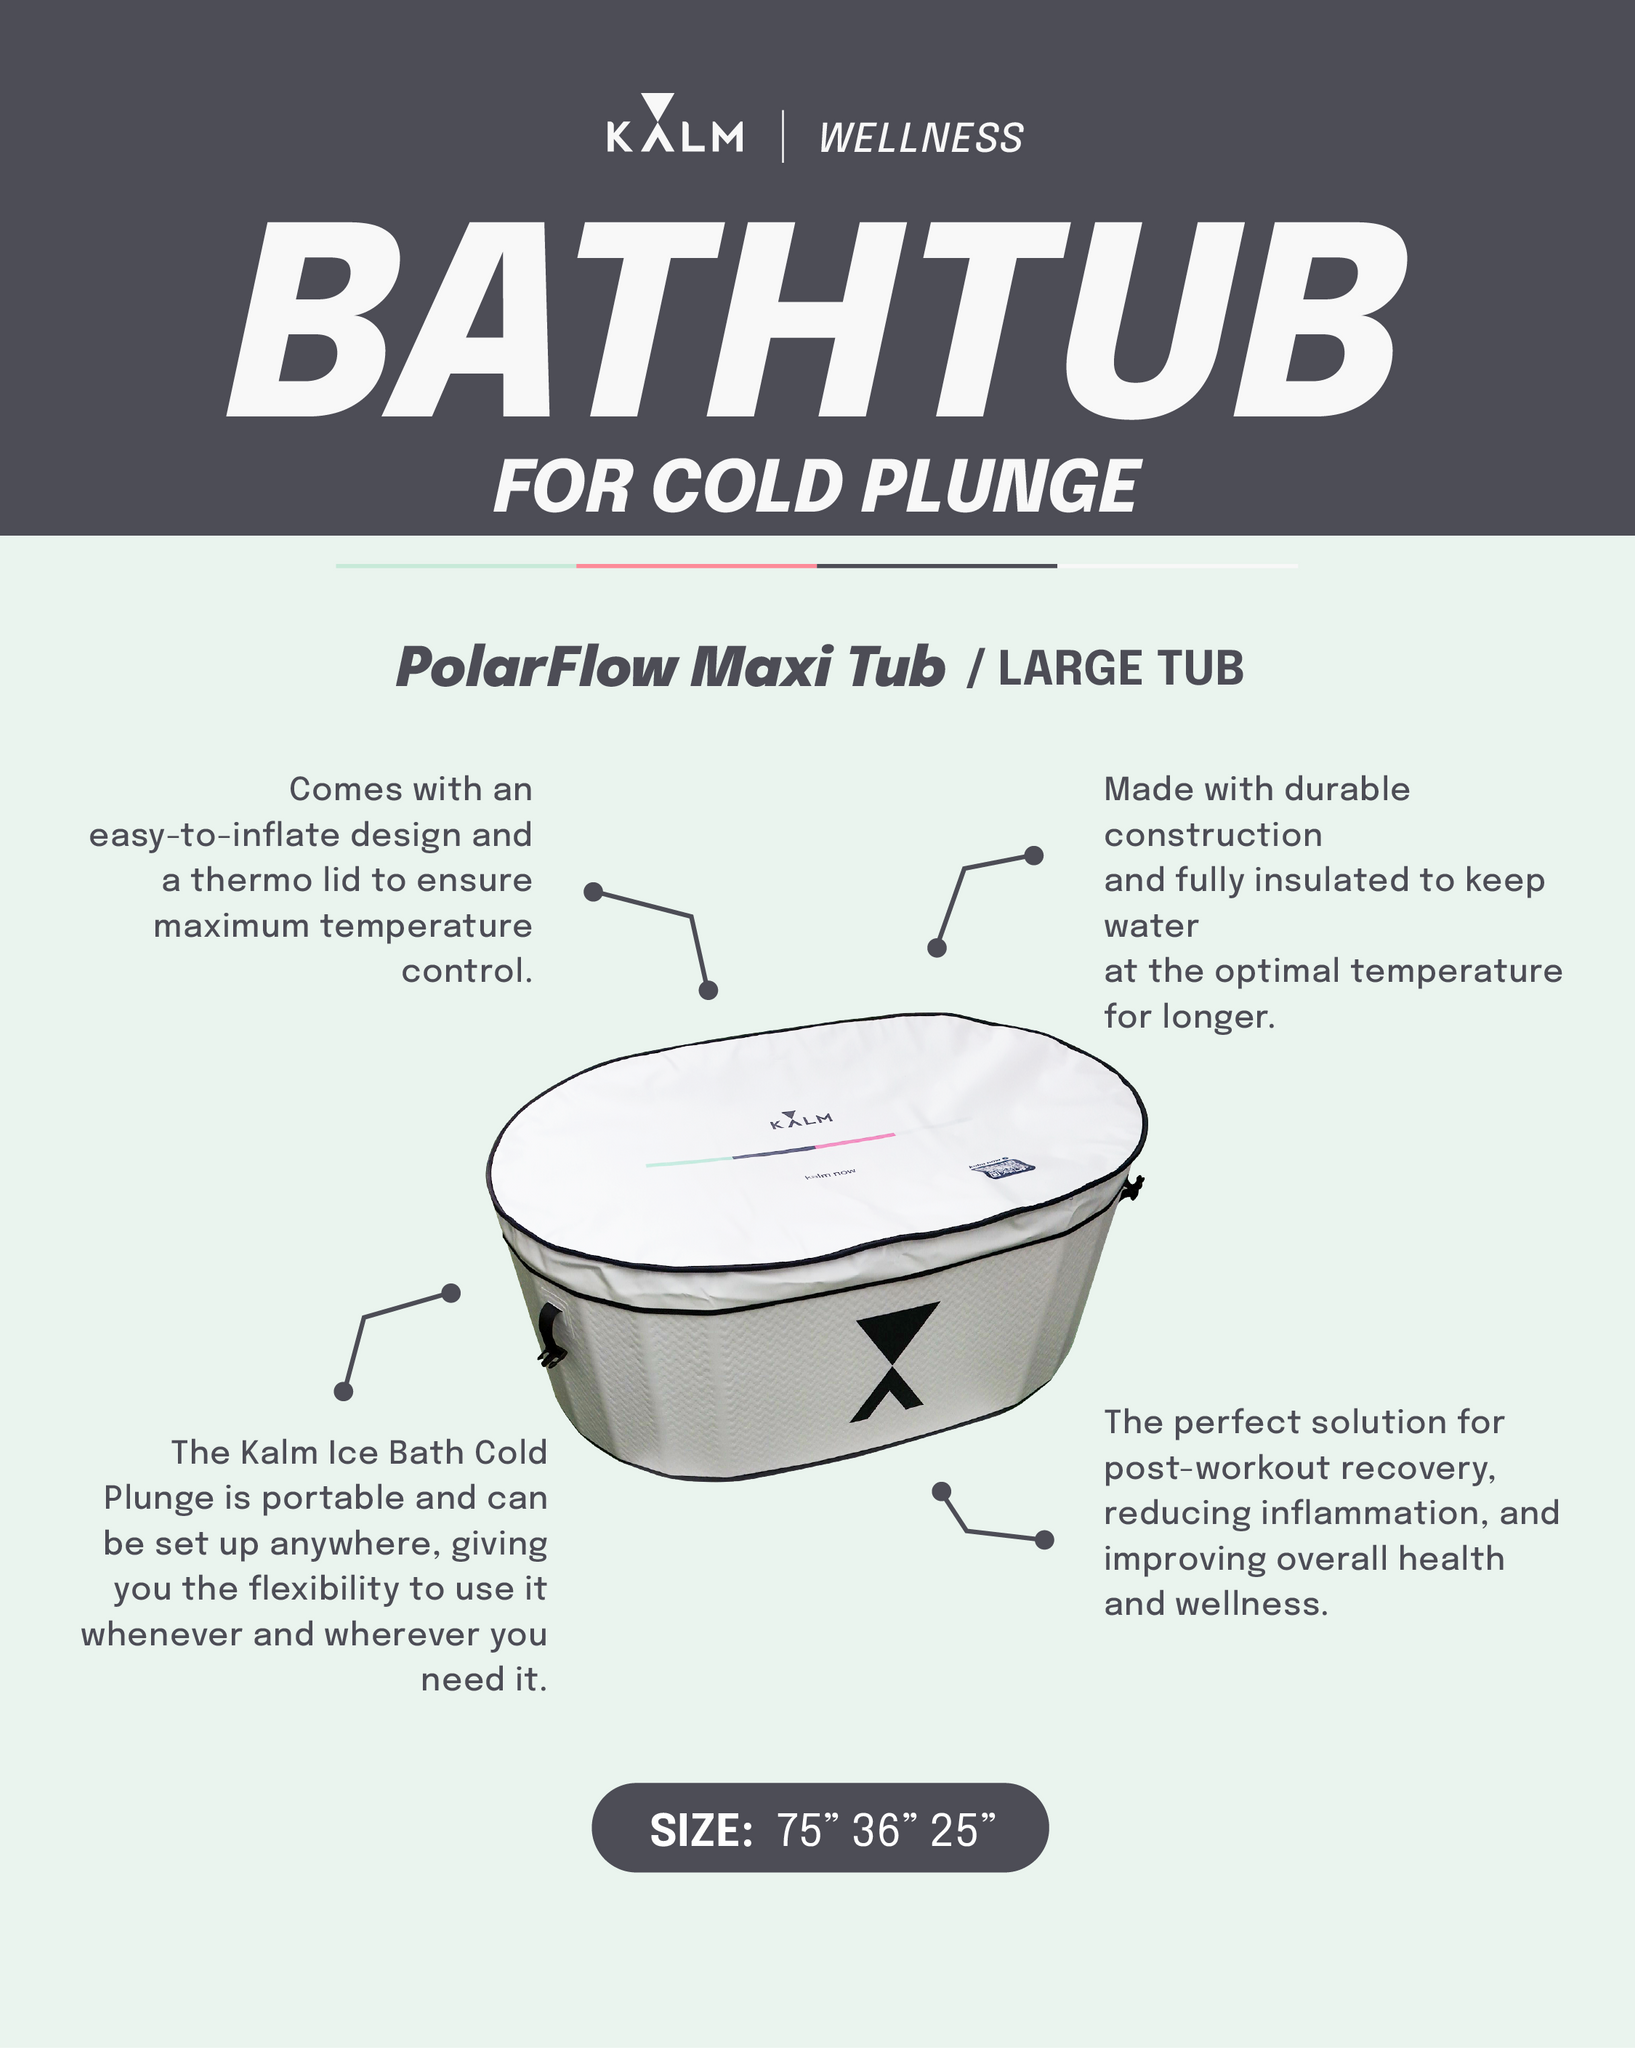 How Long Should You Stay In An Ice Bath? - SET FOR SET